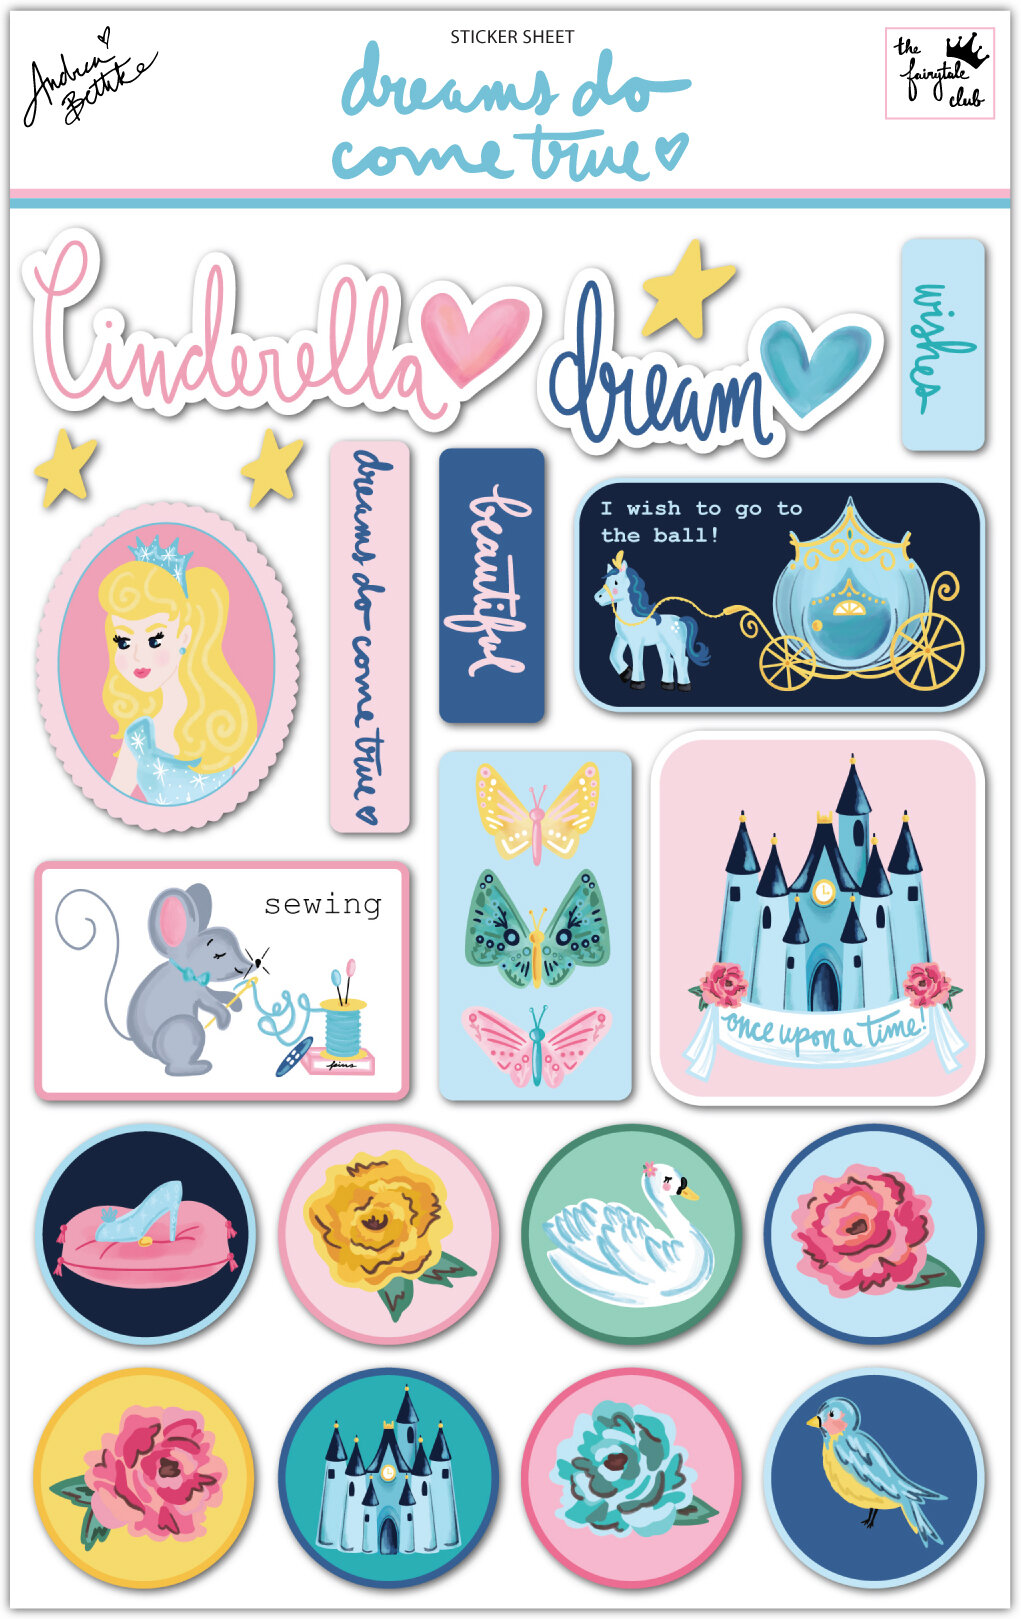 Dreams Do Come True - Stickers with packaging-06.jpg